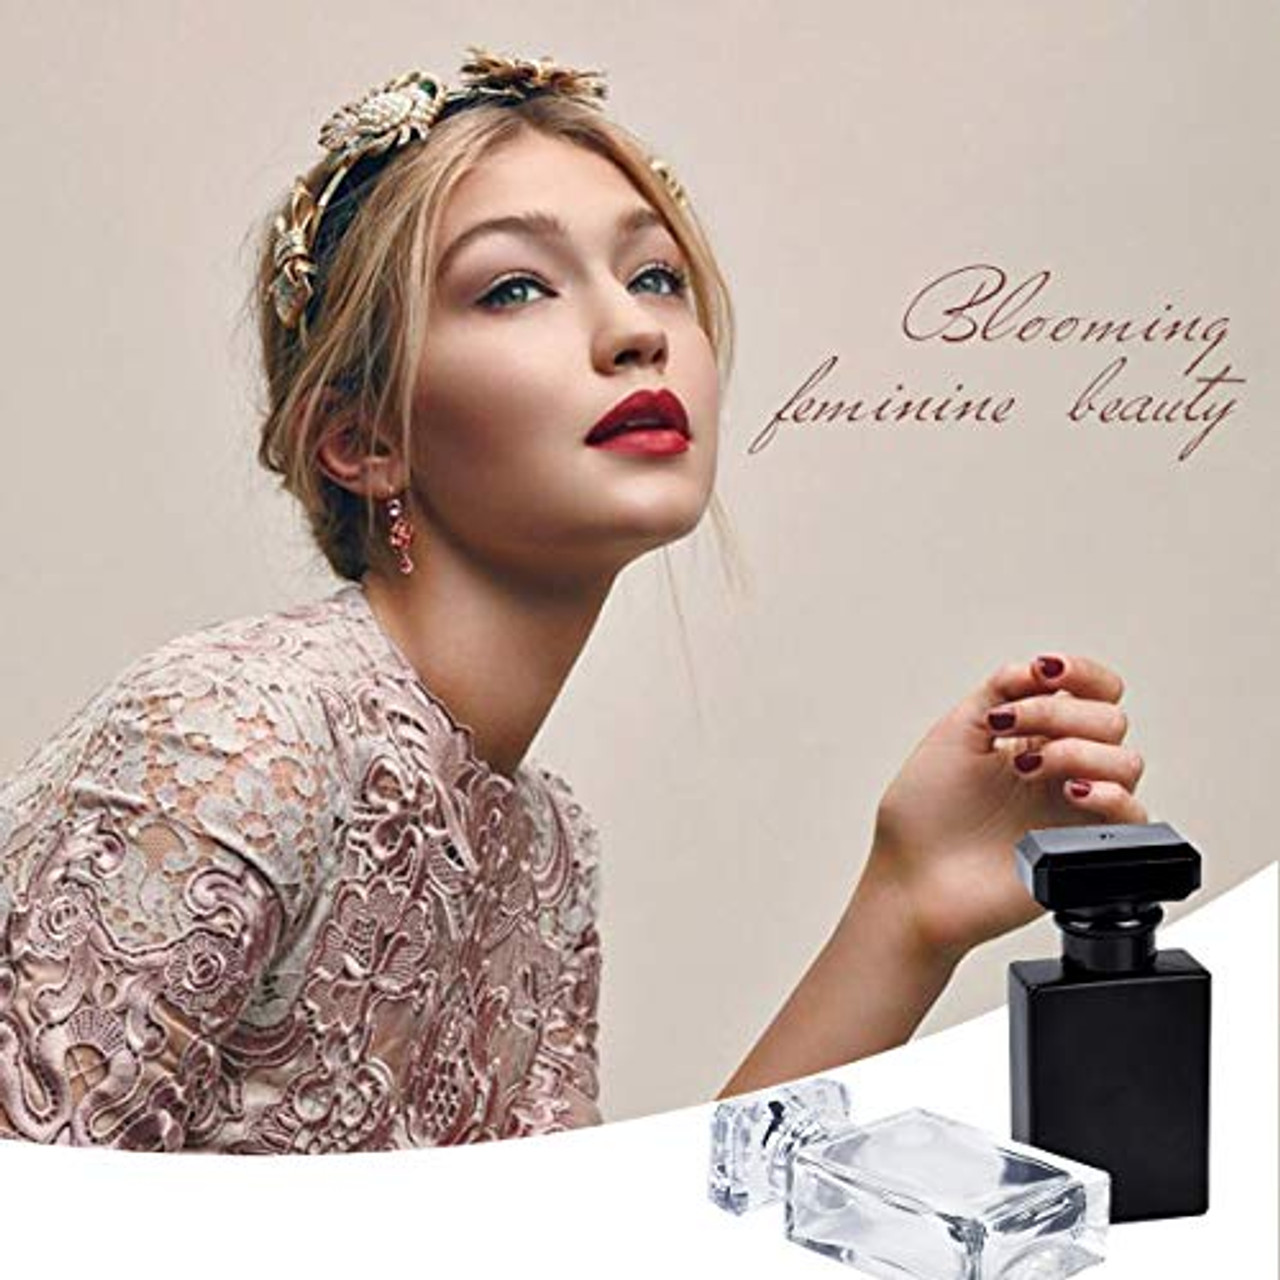 6 Pack 30ml / 1 Oz Black Assorted Refillable Perfume Bottle, Portable  Square Empty Glass Perfume Atomizer Bottle with Spray Applicator 4 Free  kinds of